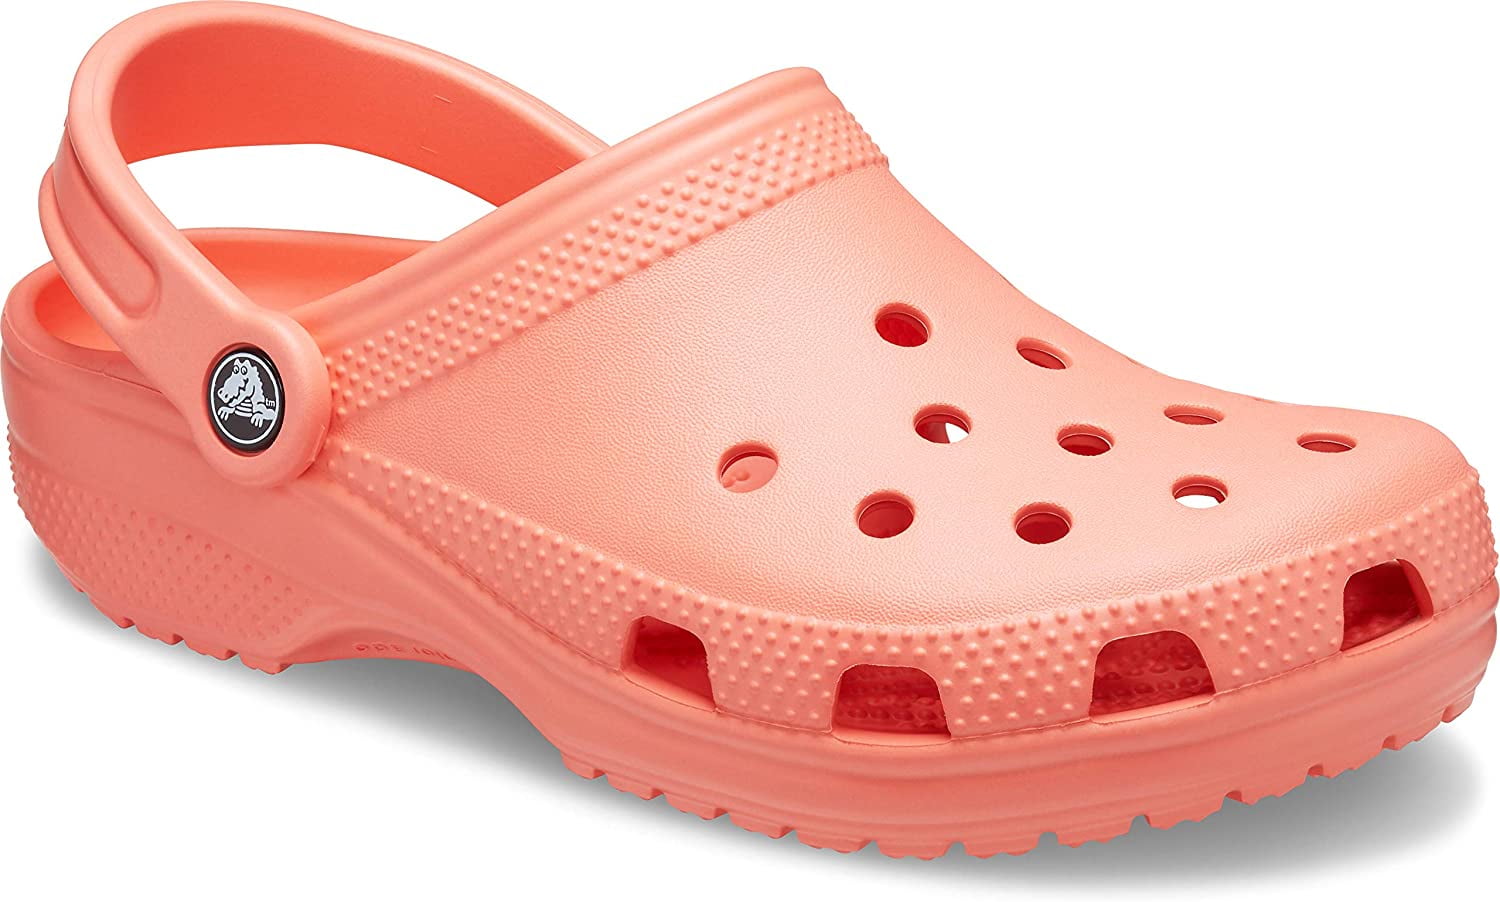 Comfortable Slip on Casual Water Shoe Crocs Unisexs Mens and Womens Classic Clog 